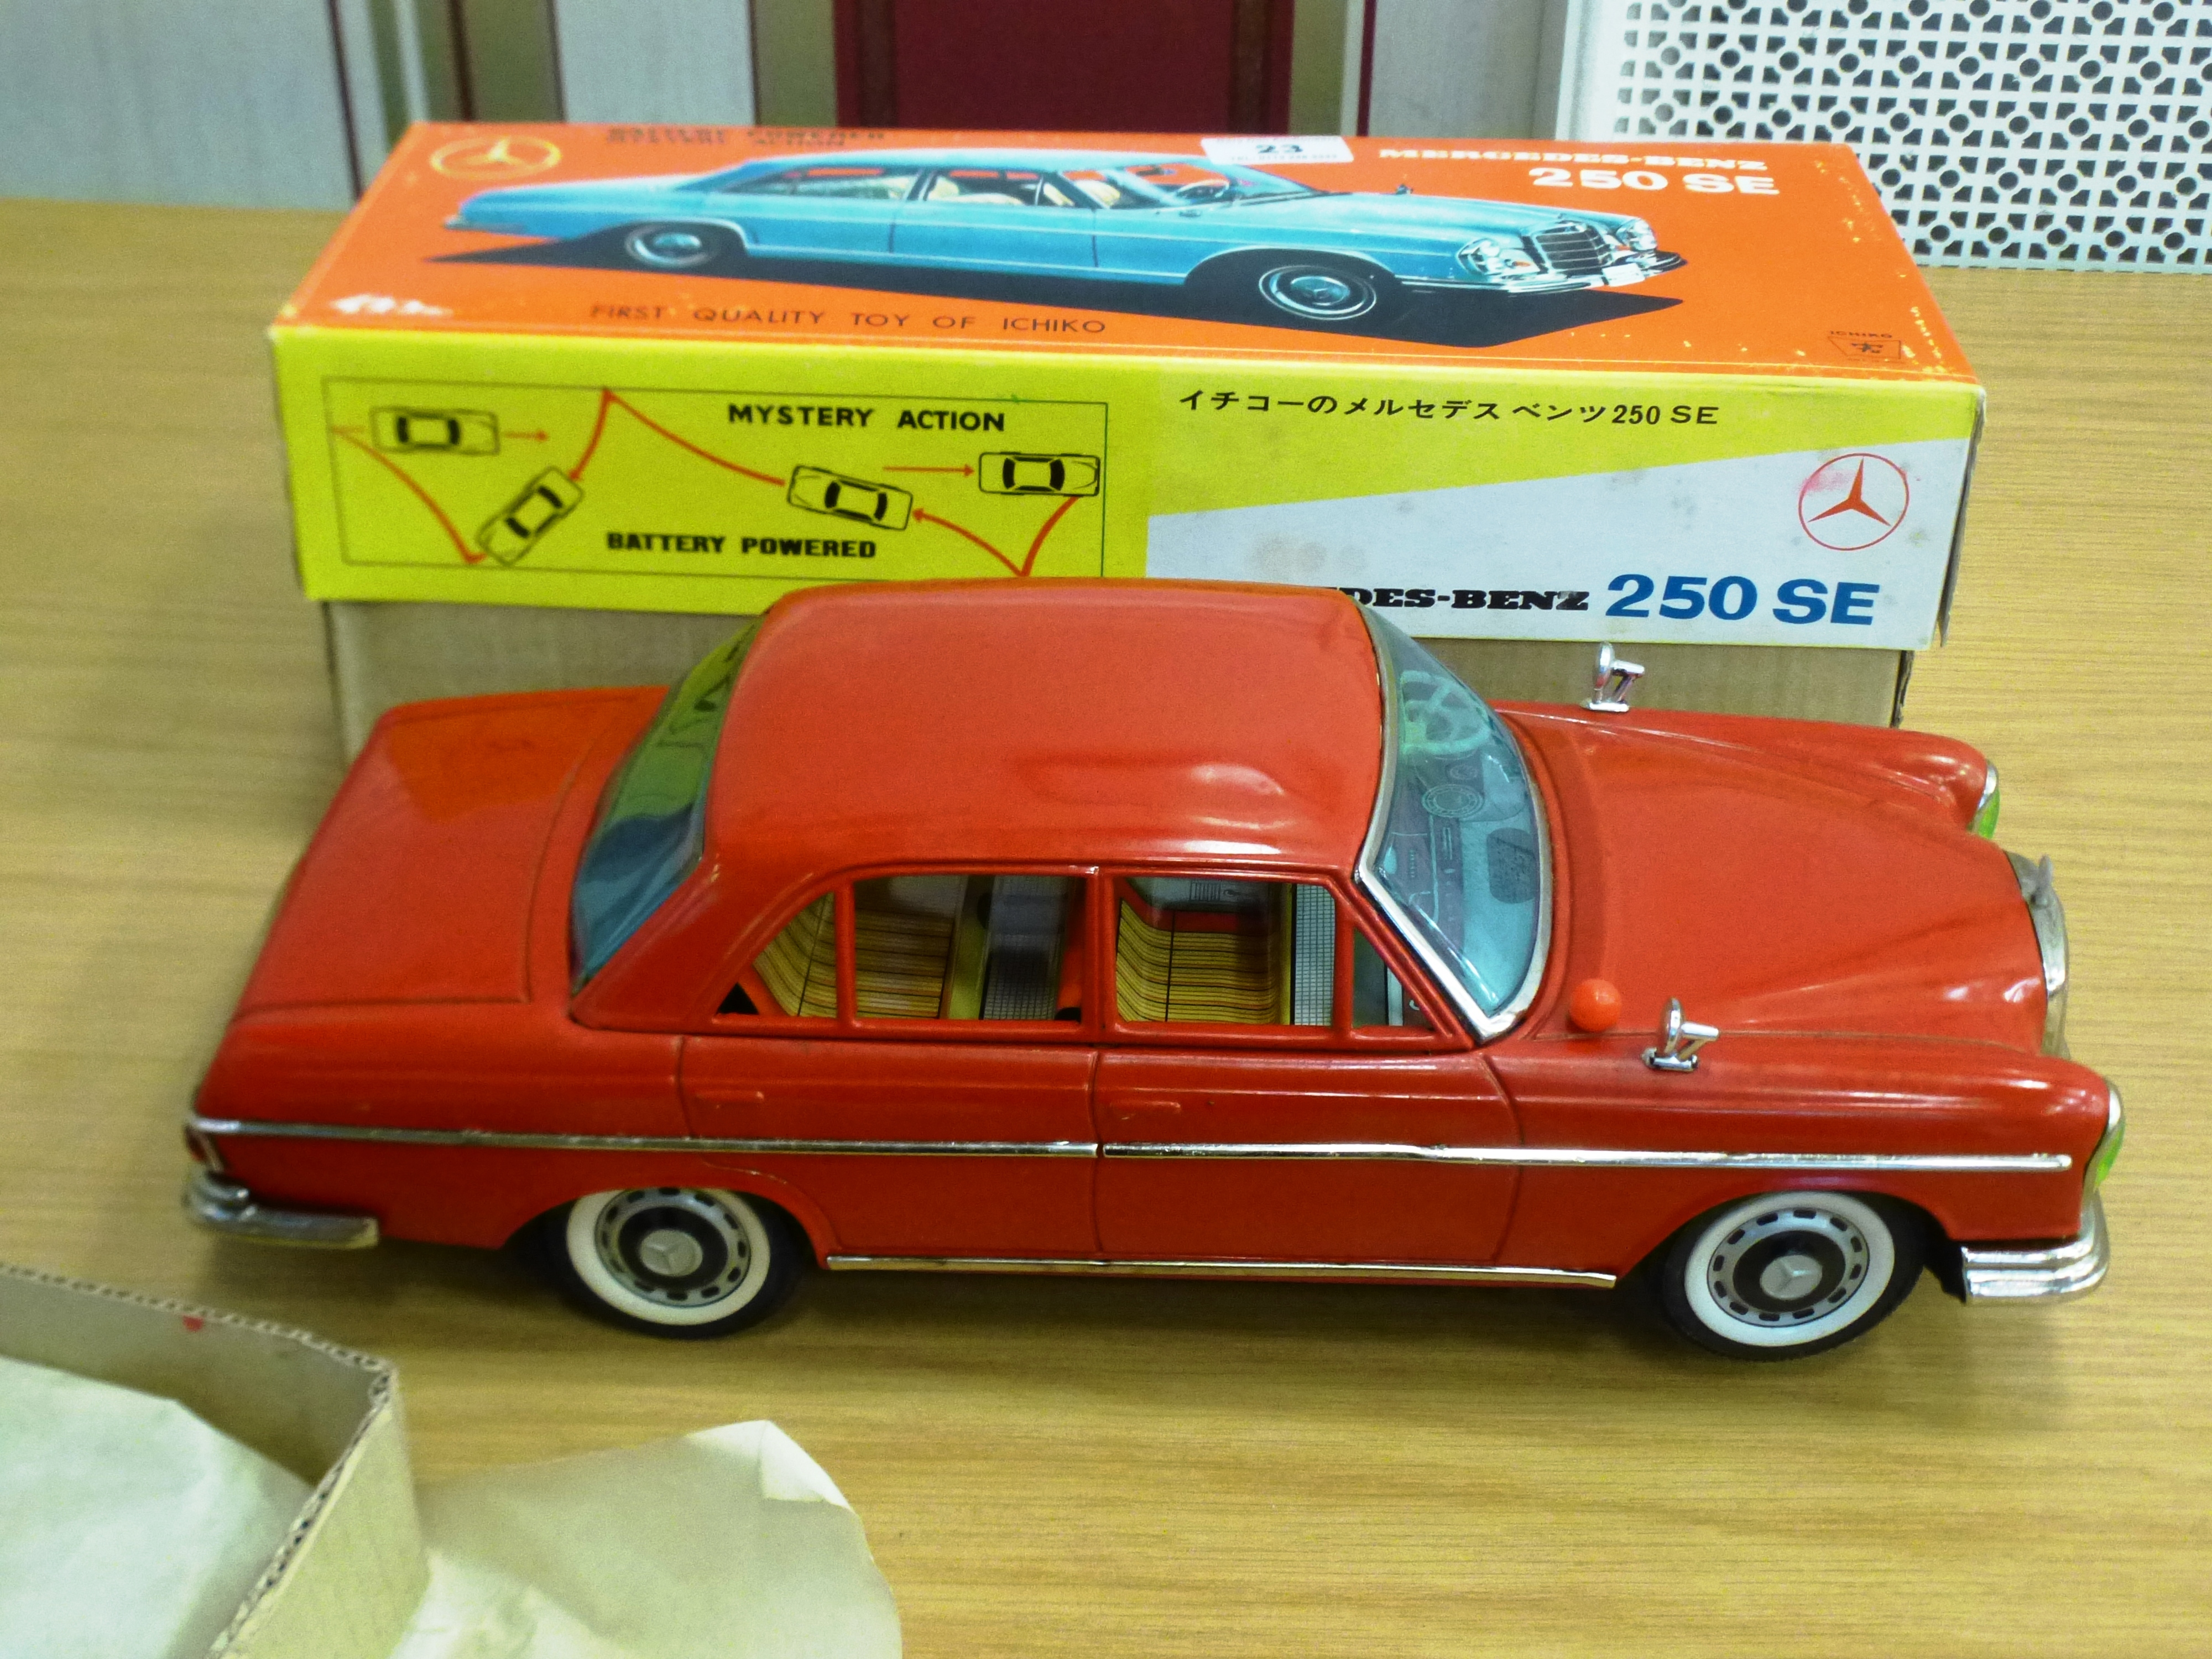 BOXED ICHIKO BATTERY POWERED MERCEDES-BENZ 250 SE (RED) - Image 4 of 7